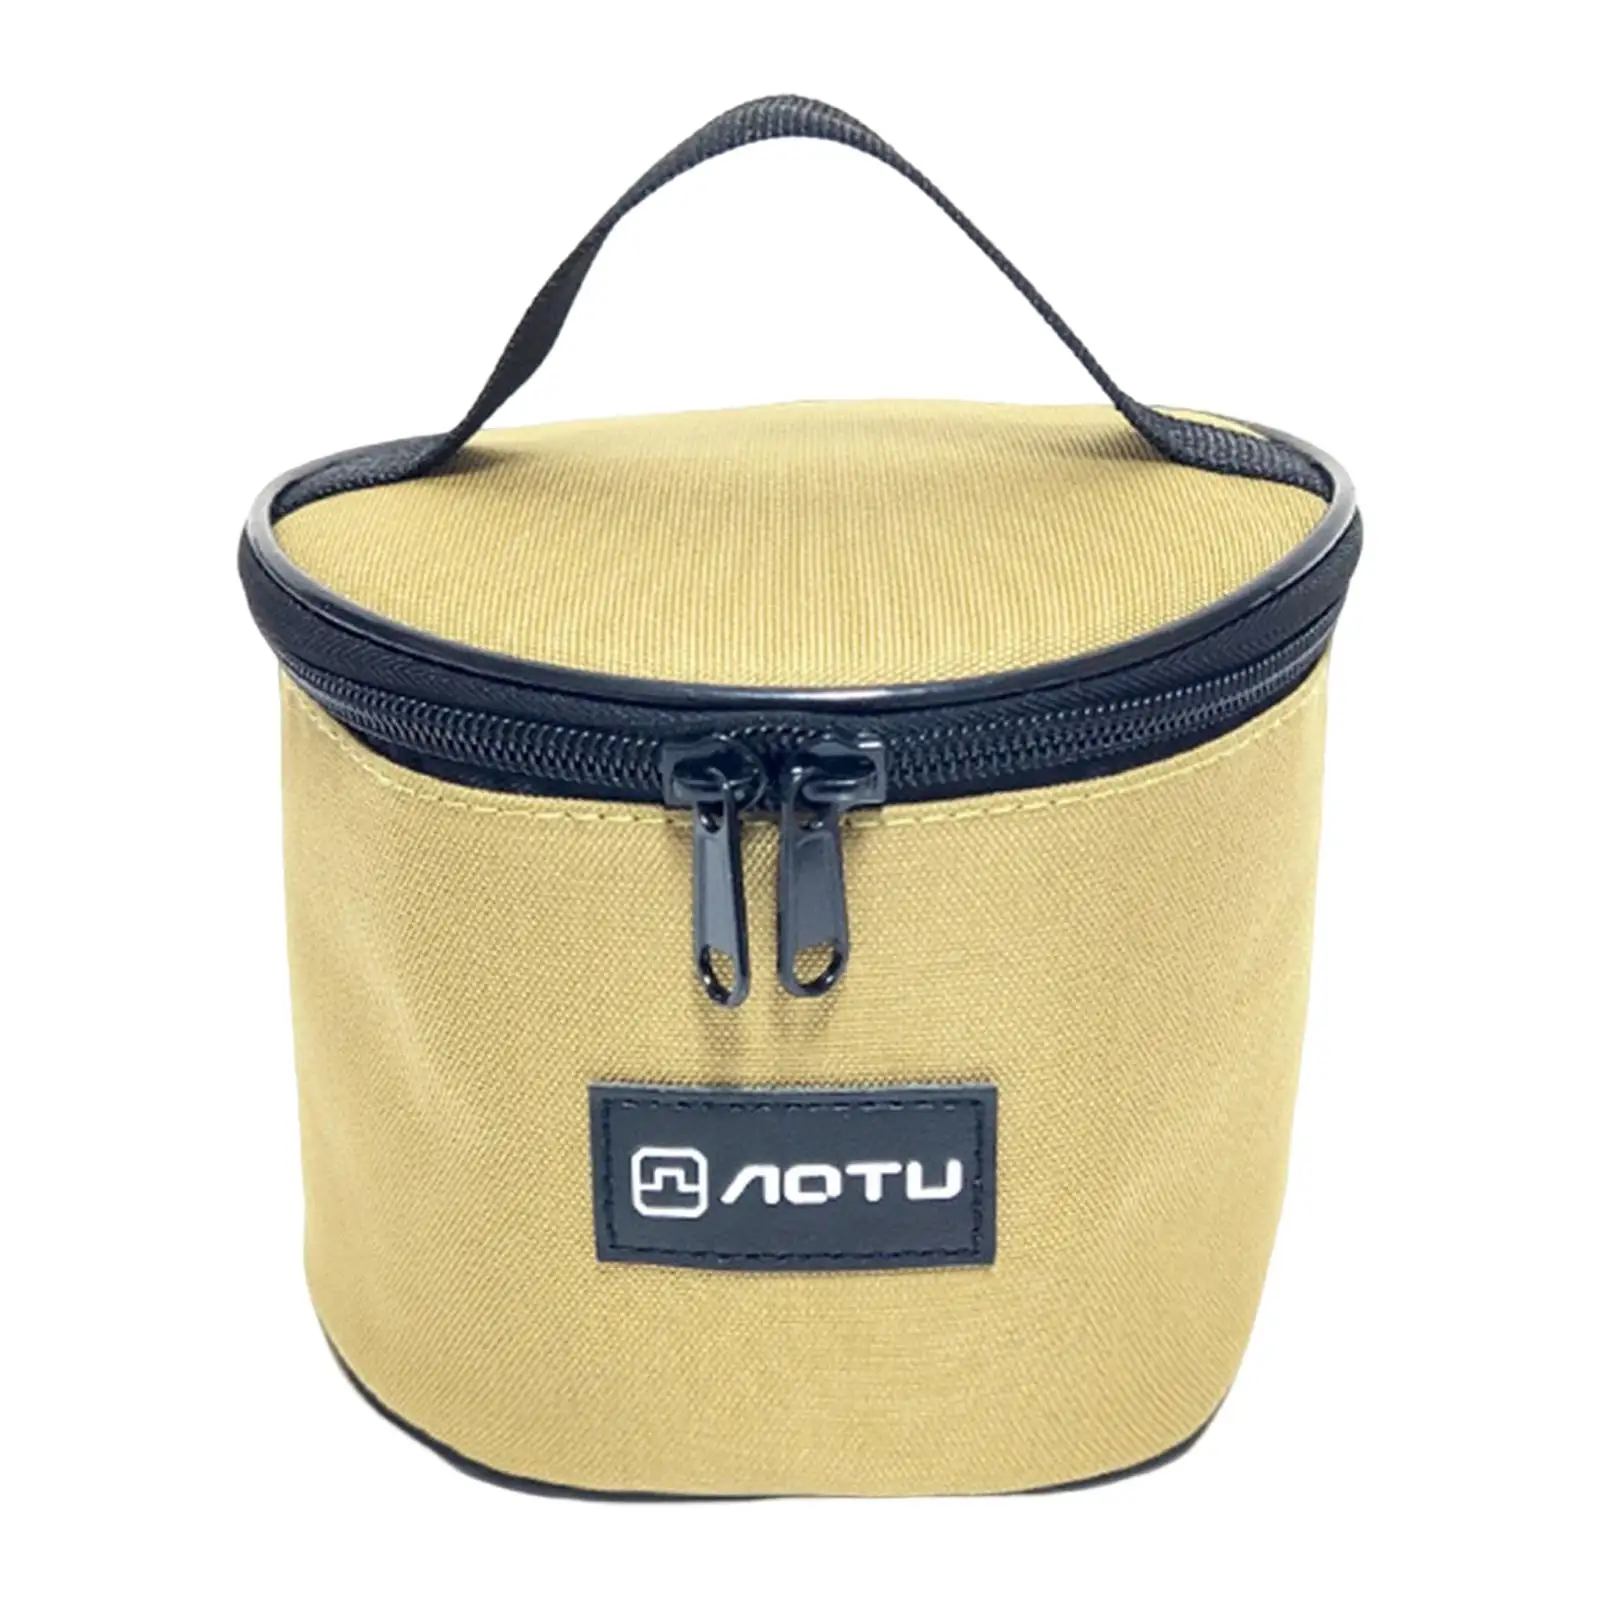 Outdoor Bowl Storage Bag Carry Case Hiking with Handle Travel Picnic Cutlery